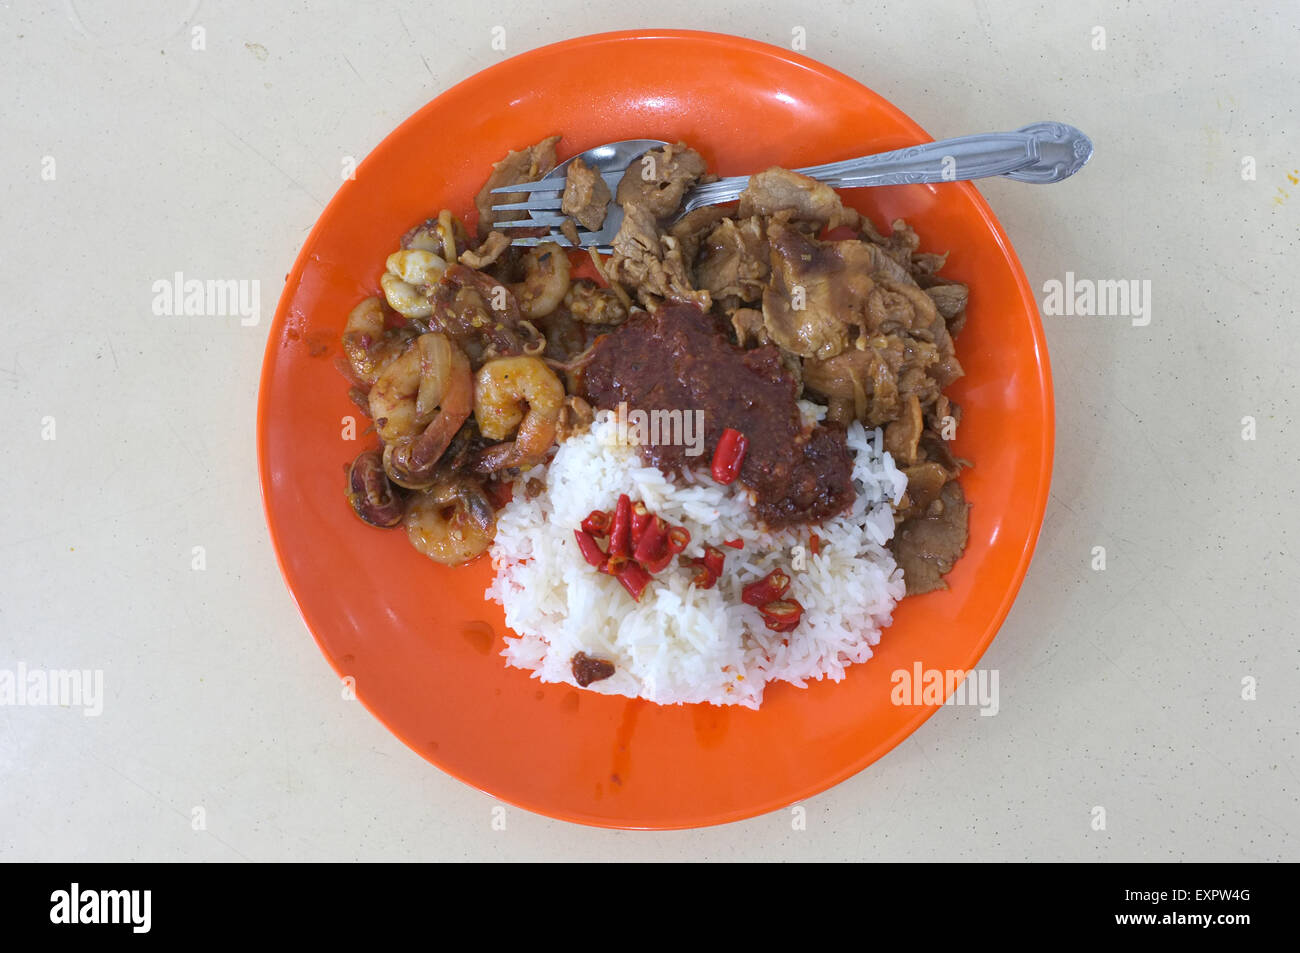 Asian food style, rice with stir fried shrimp and pork Stock Photo